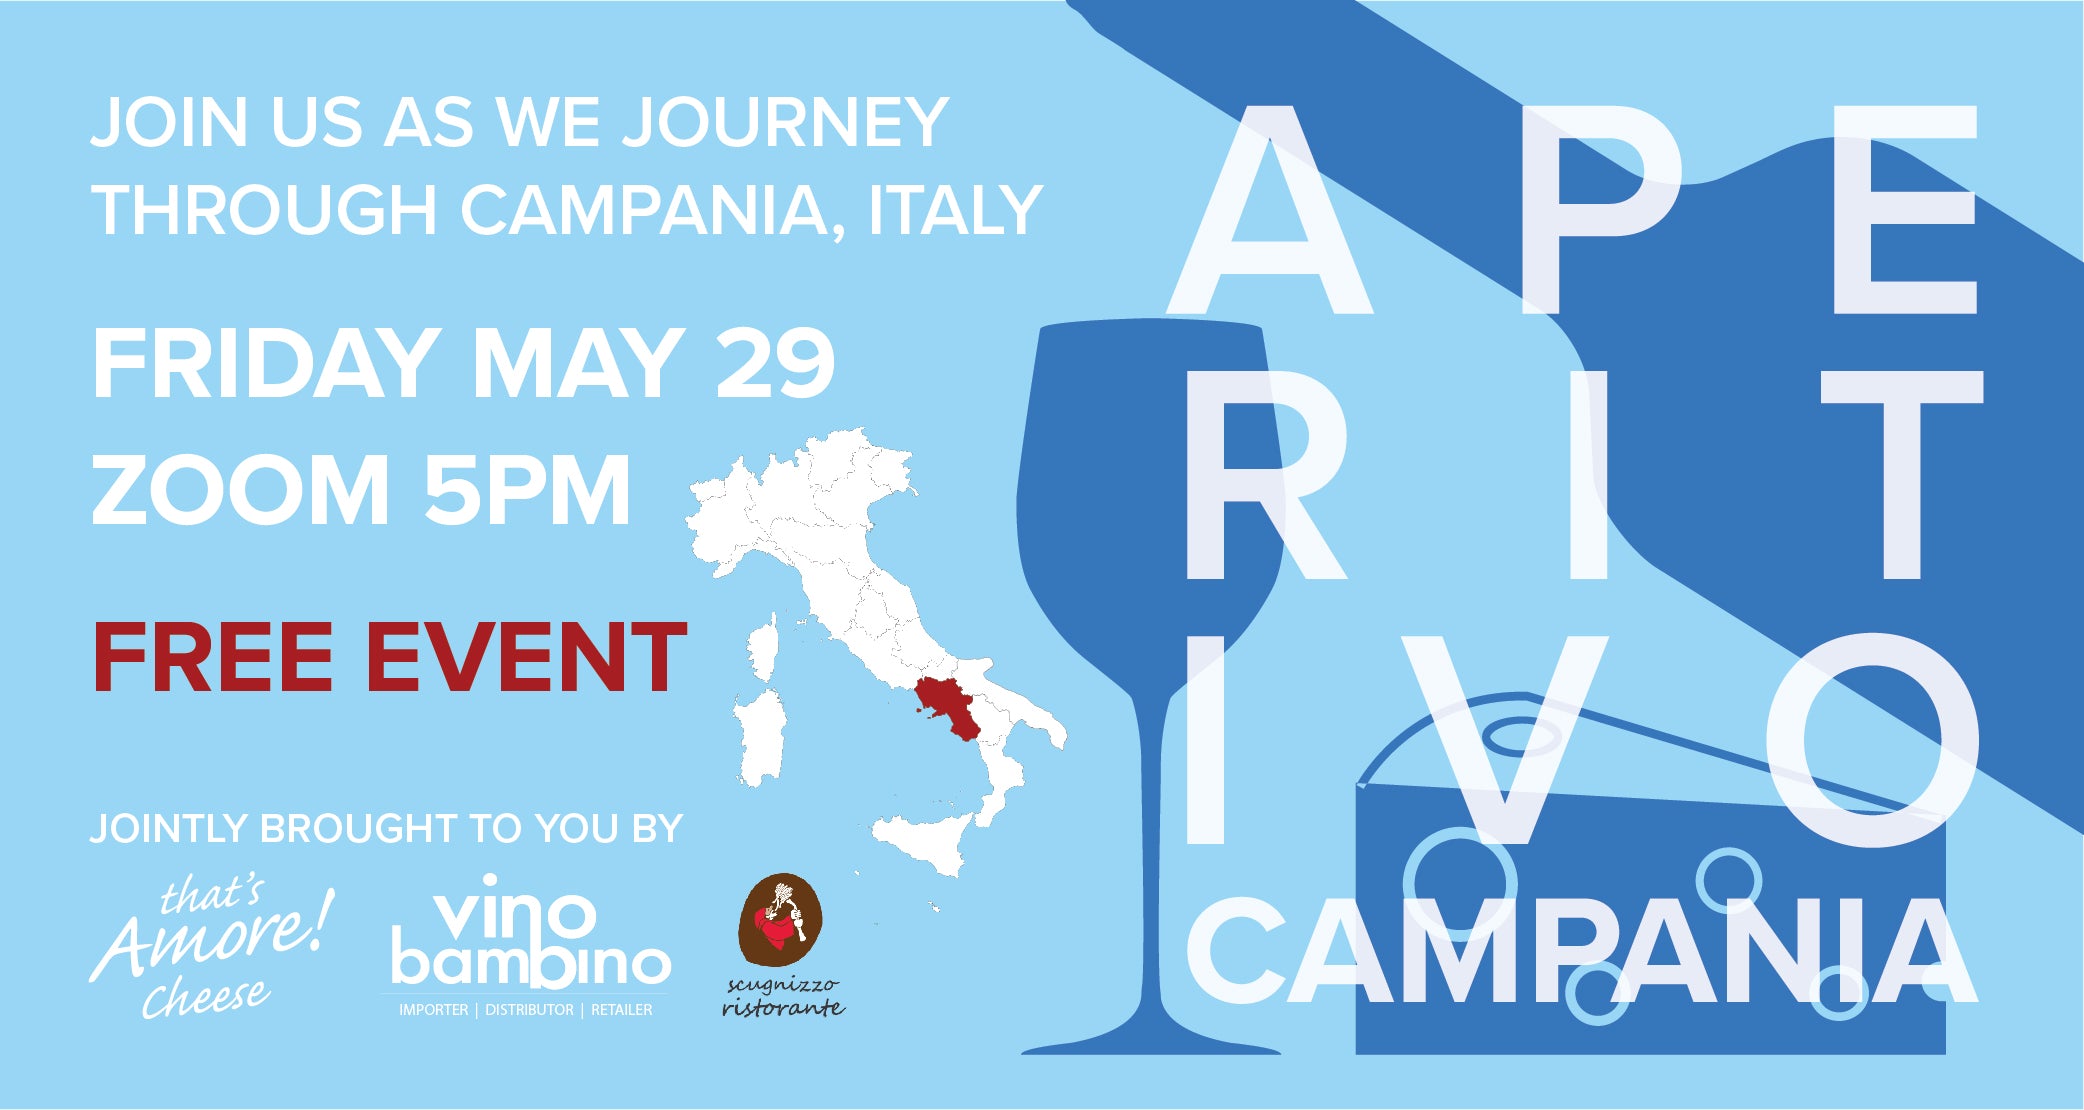 Free Event: We're going to Napoli! - Aperitivo Friday 29th May, 5pm